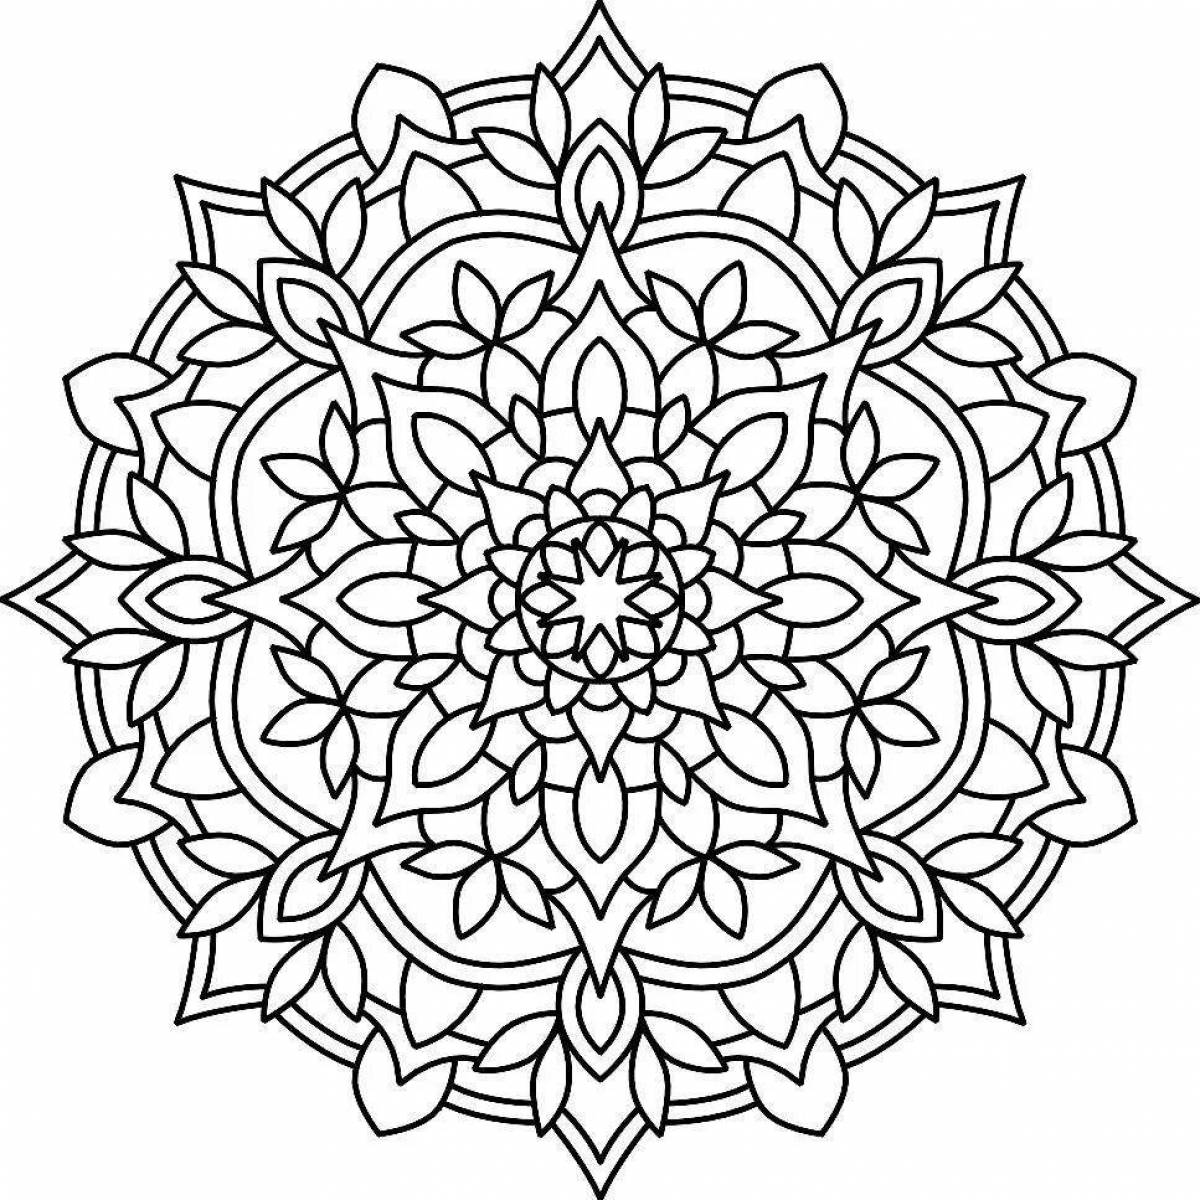 Great anti-stress mandala coloring pages for kids